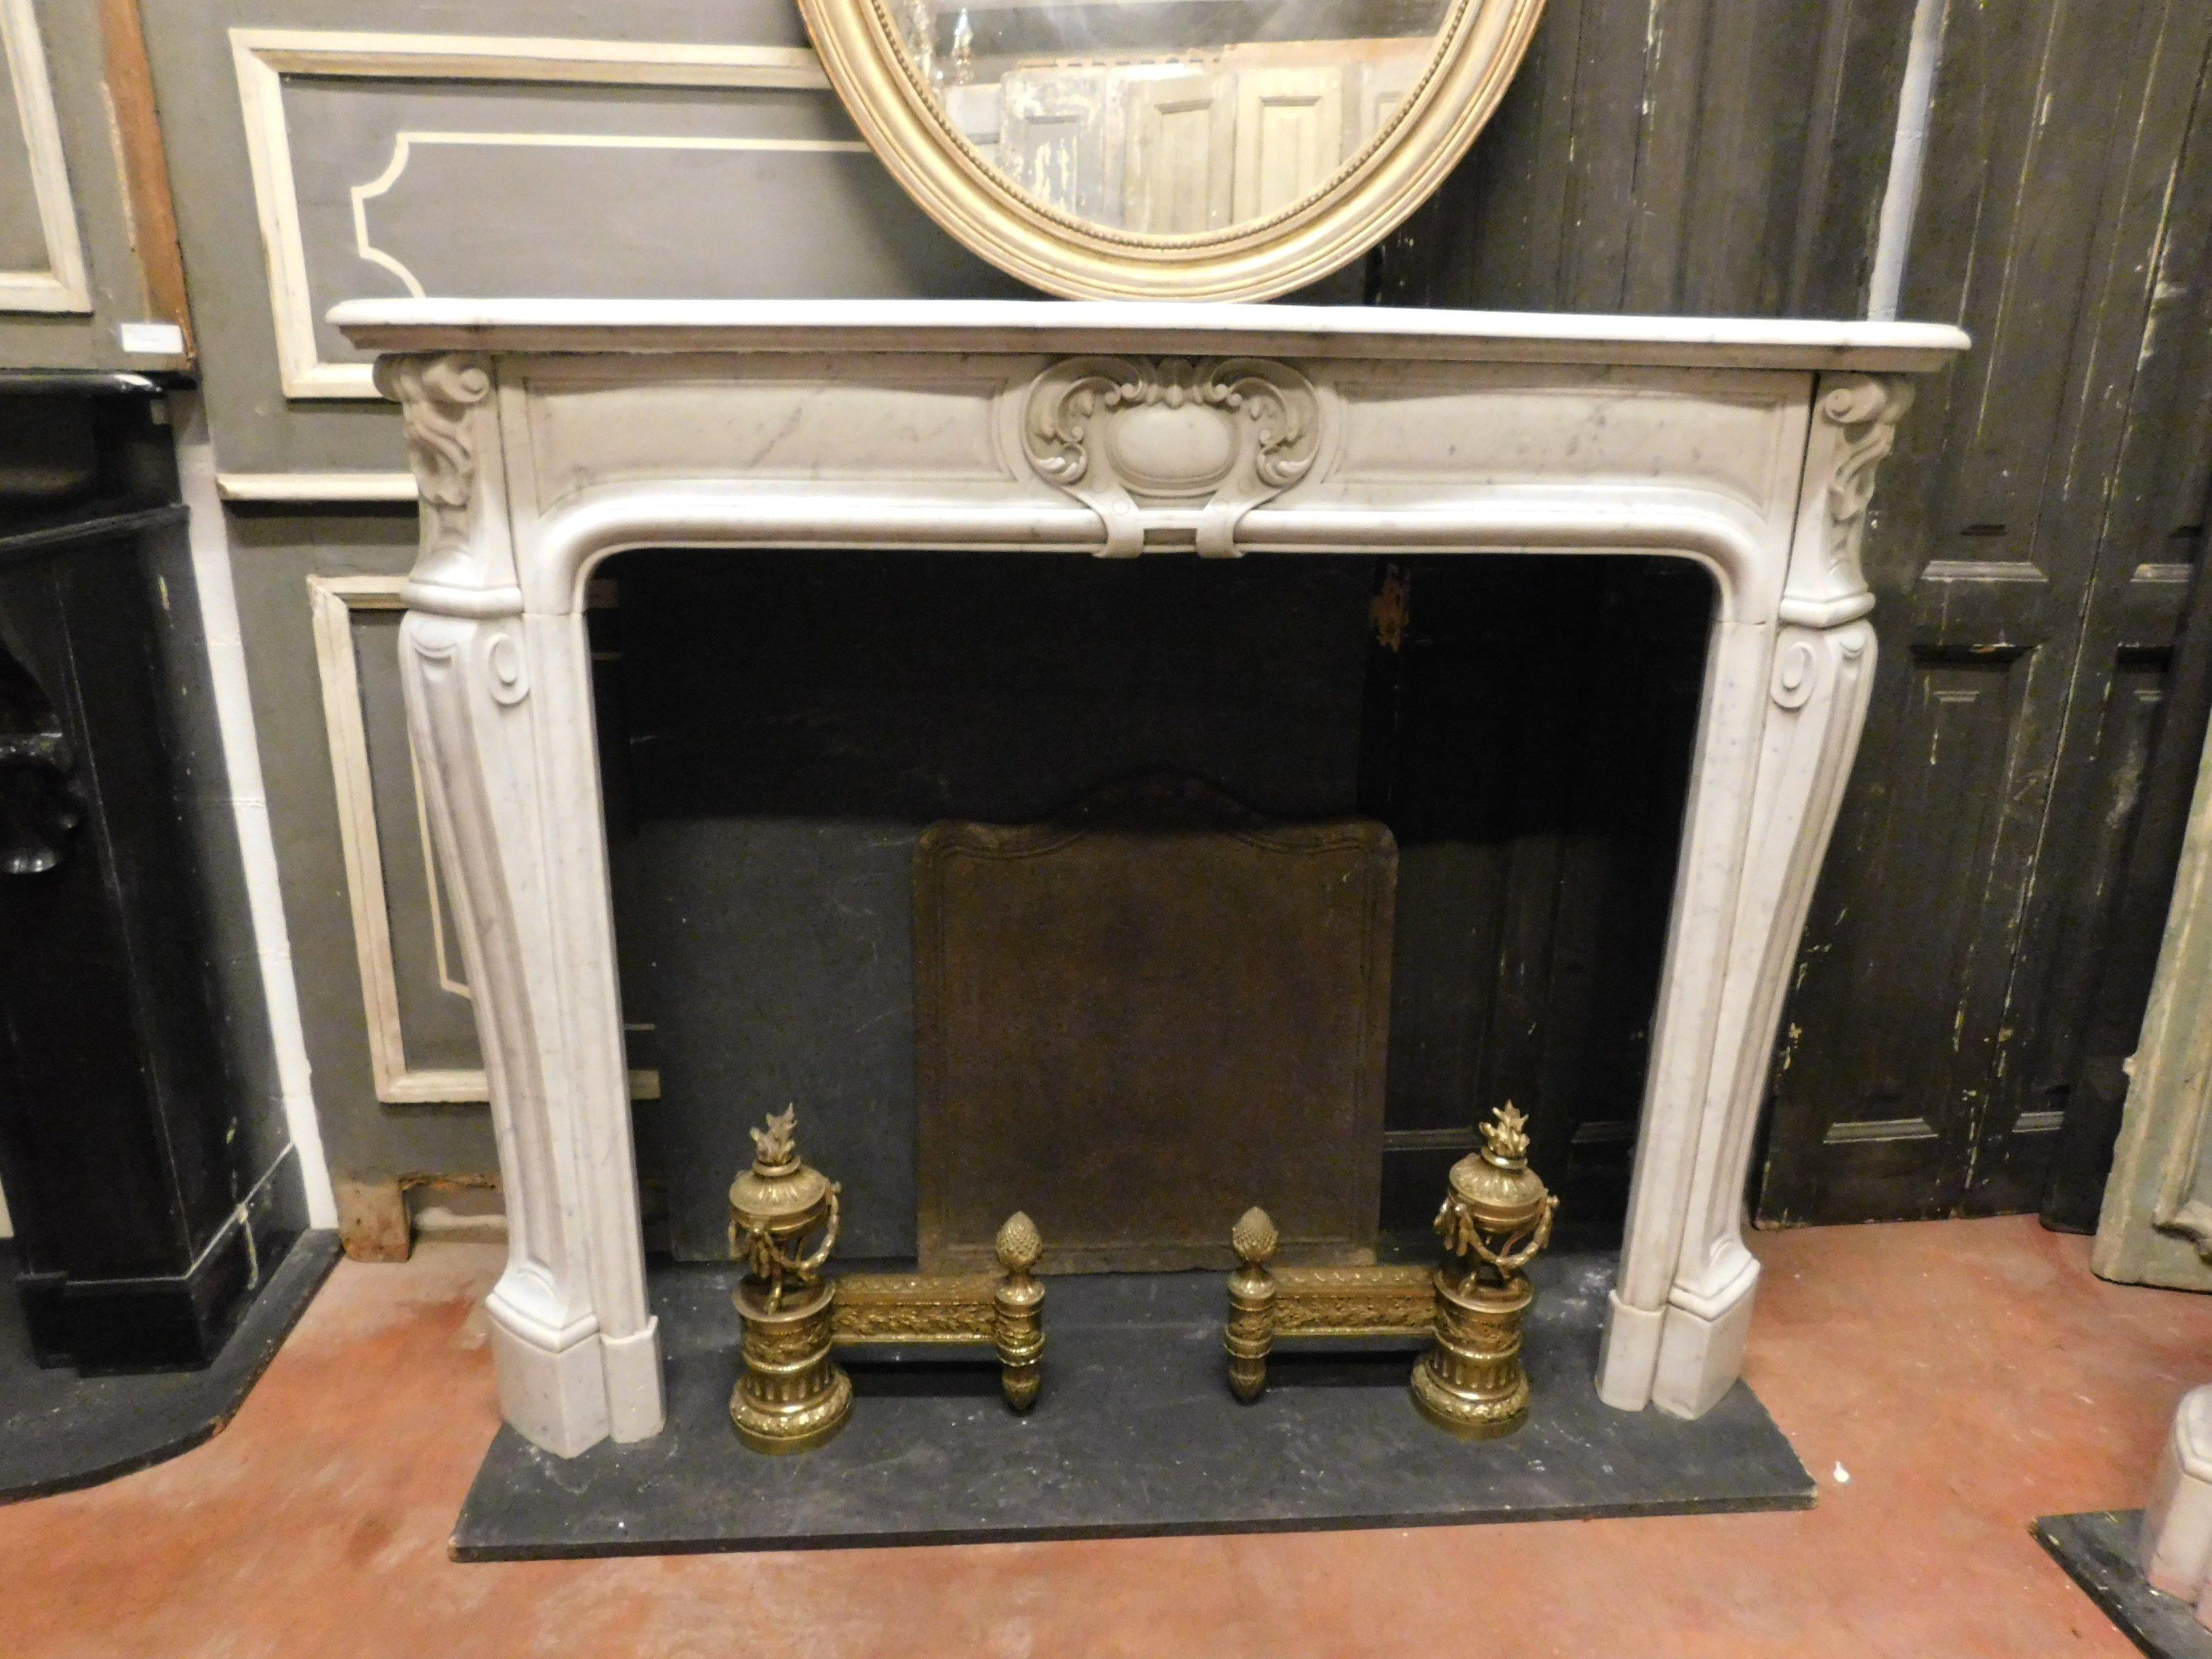 Ancient fireplace in white Carrara marble, with central sculpture where it is then possible to engrave initials or family symbol, hand-built in the 19th century in Italy.
Size: cm W 145 x D 38 x H 114,
The internal mouth measures cm 104 x H 94.